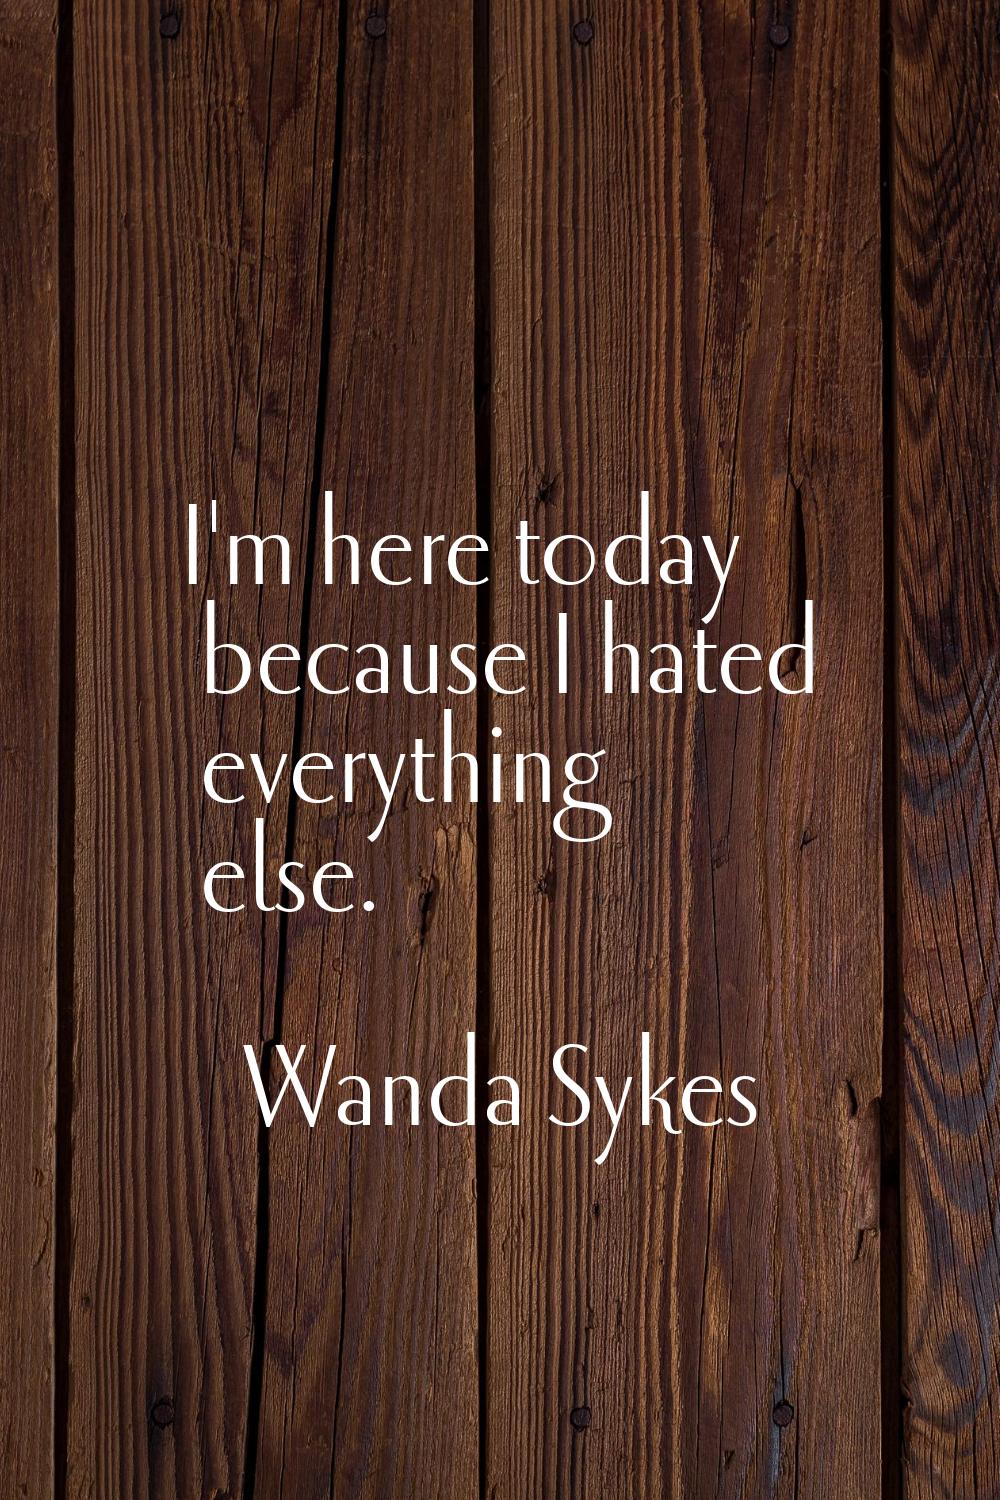 I'm here today because I hated everything else.